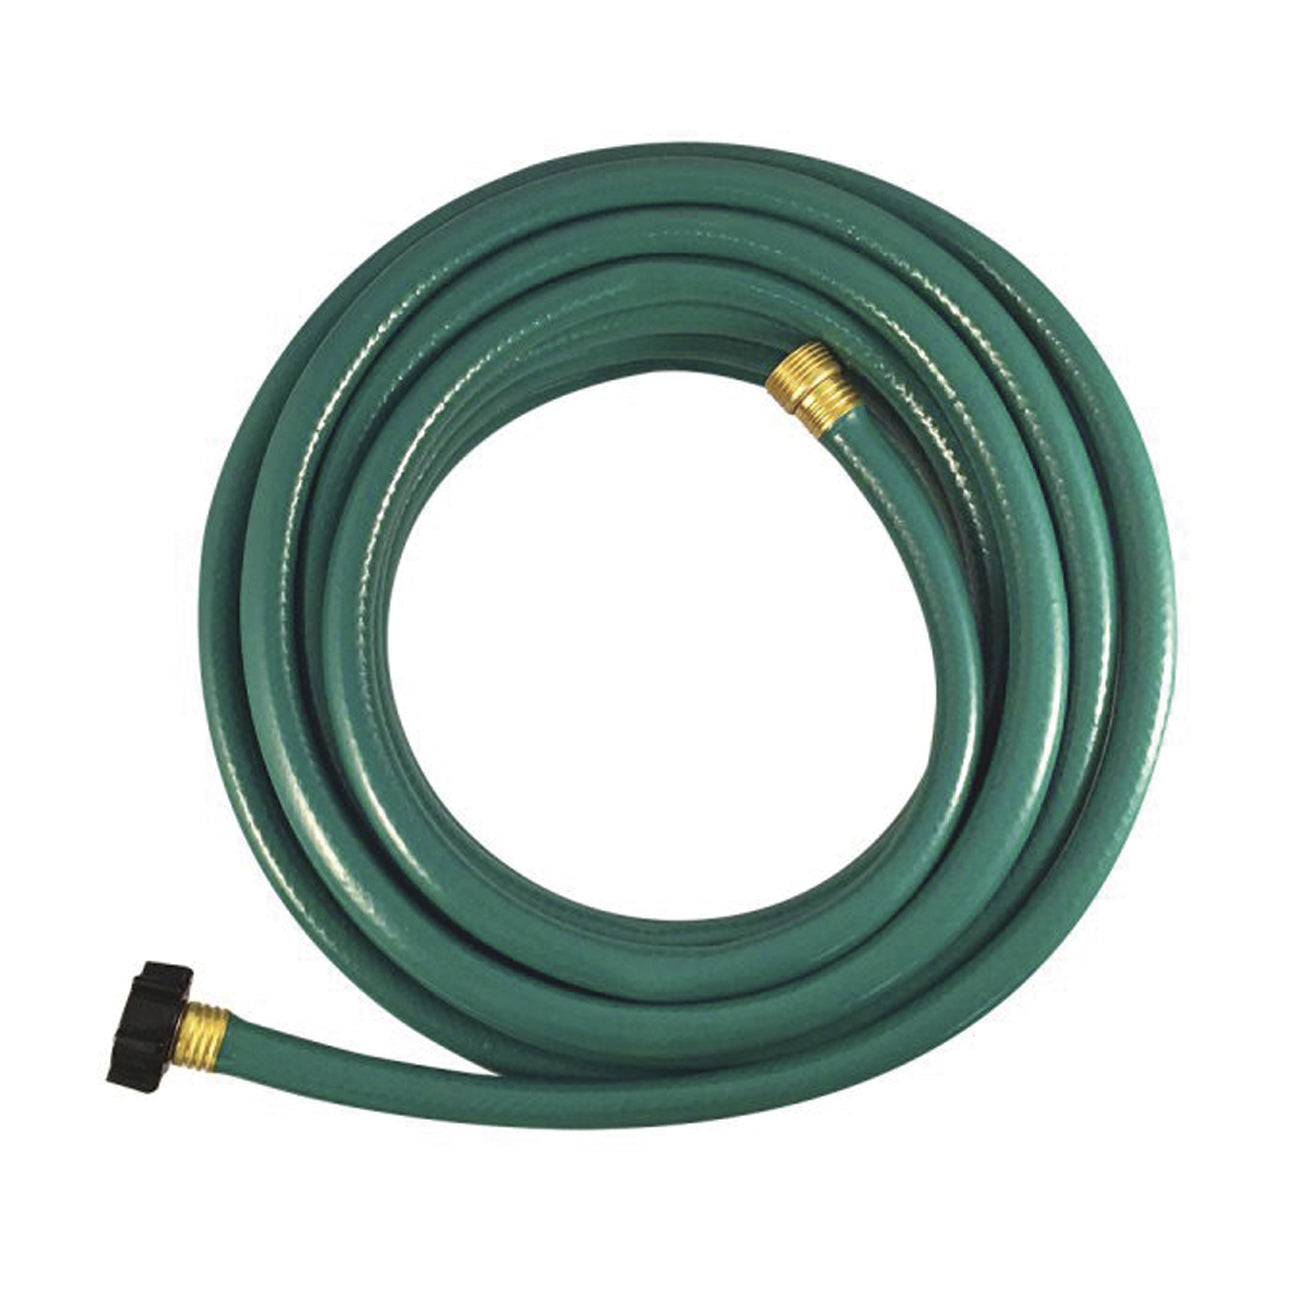 Water Hose 3 Ply 5/8" x 75'